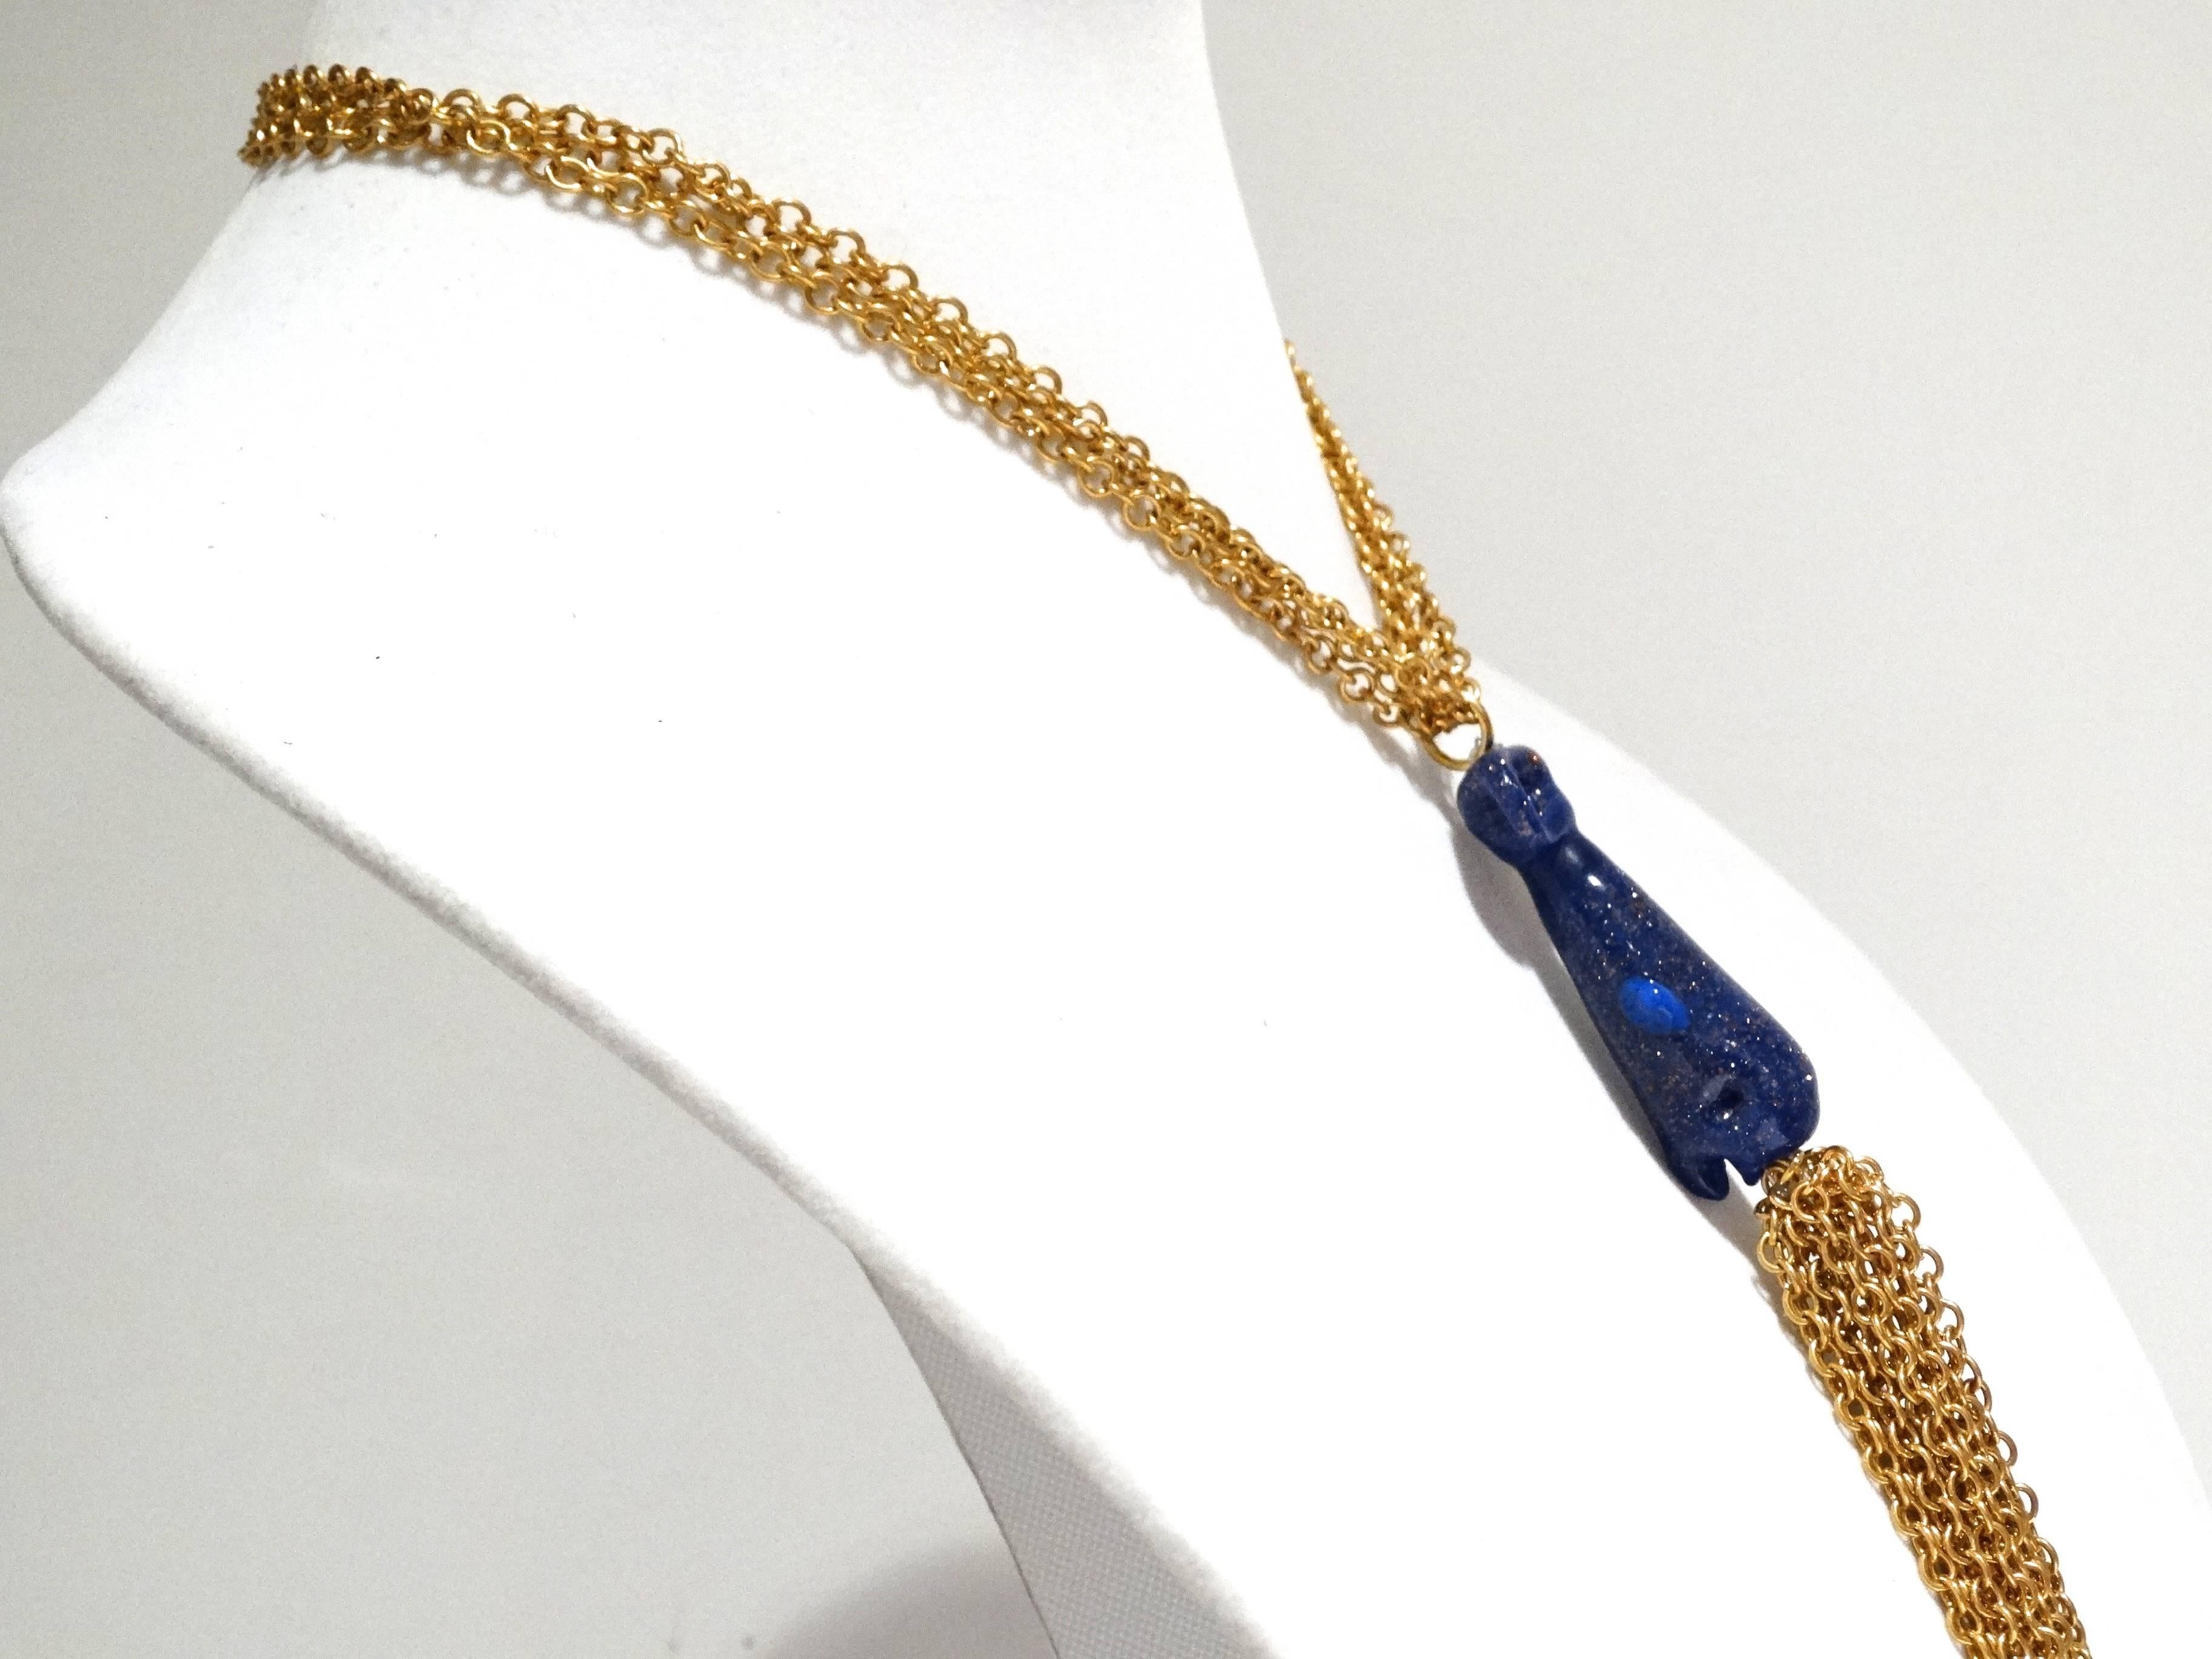 A beautifully sculptured necklace created by William de Lillo in the 70's! This necklace features a blue glass whale sculpture in center of the necklace with 15 gold plated chains hanging from the front of the whale that drop down 8